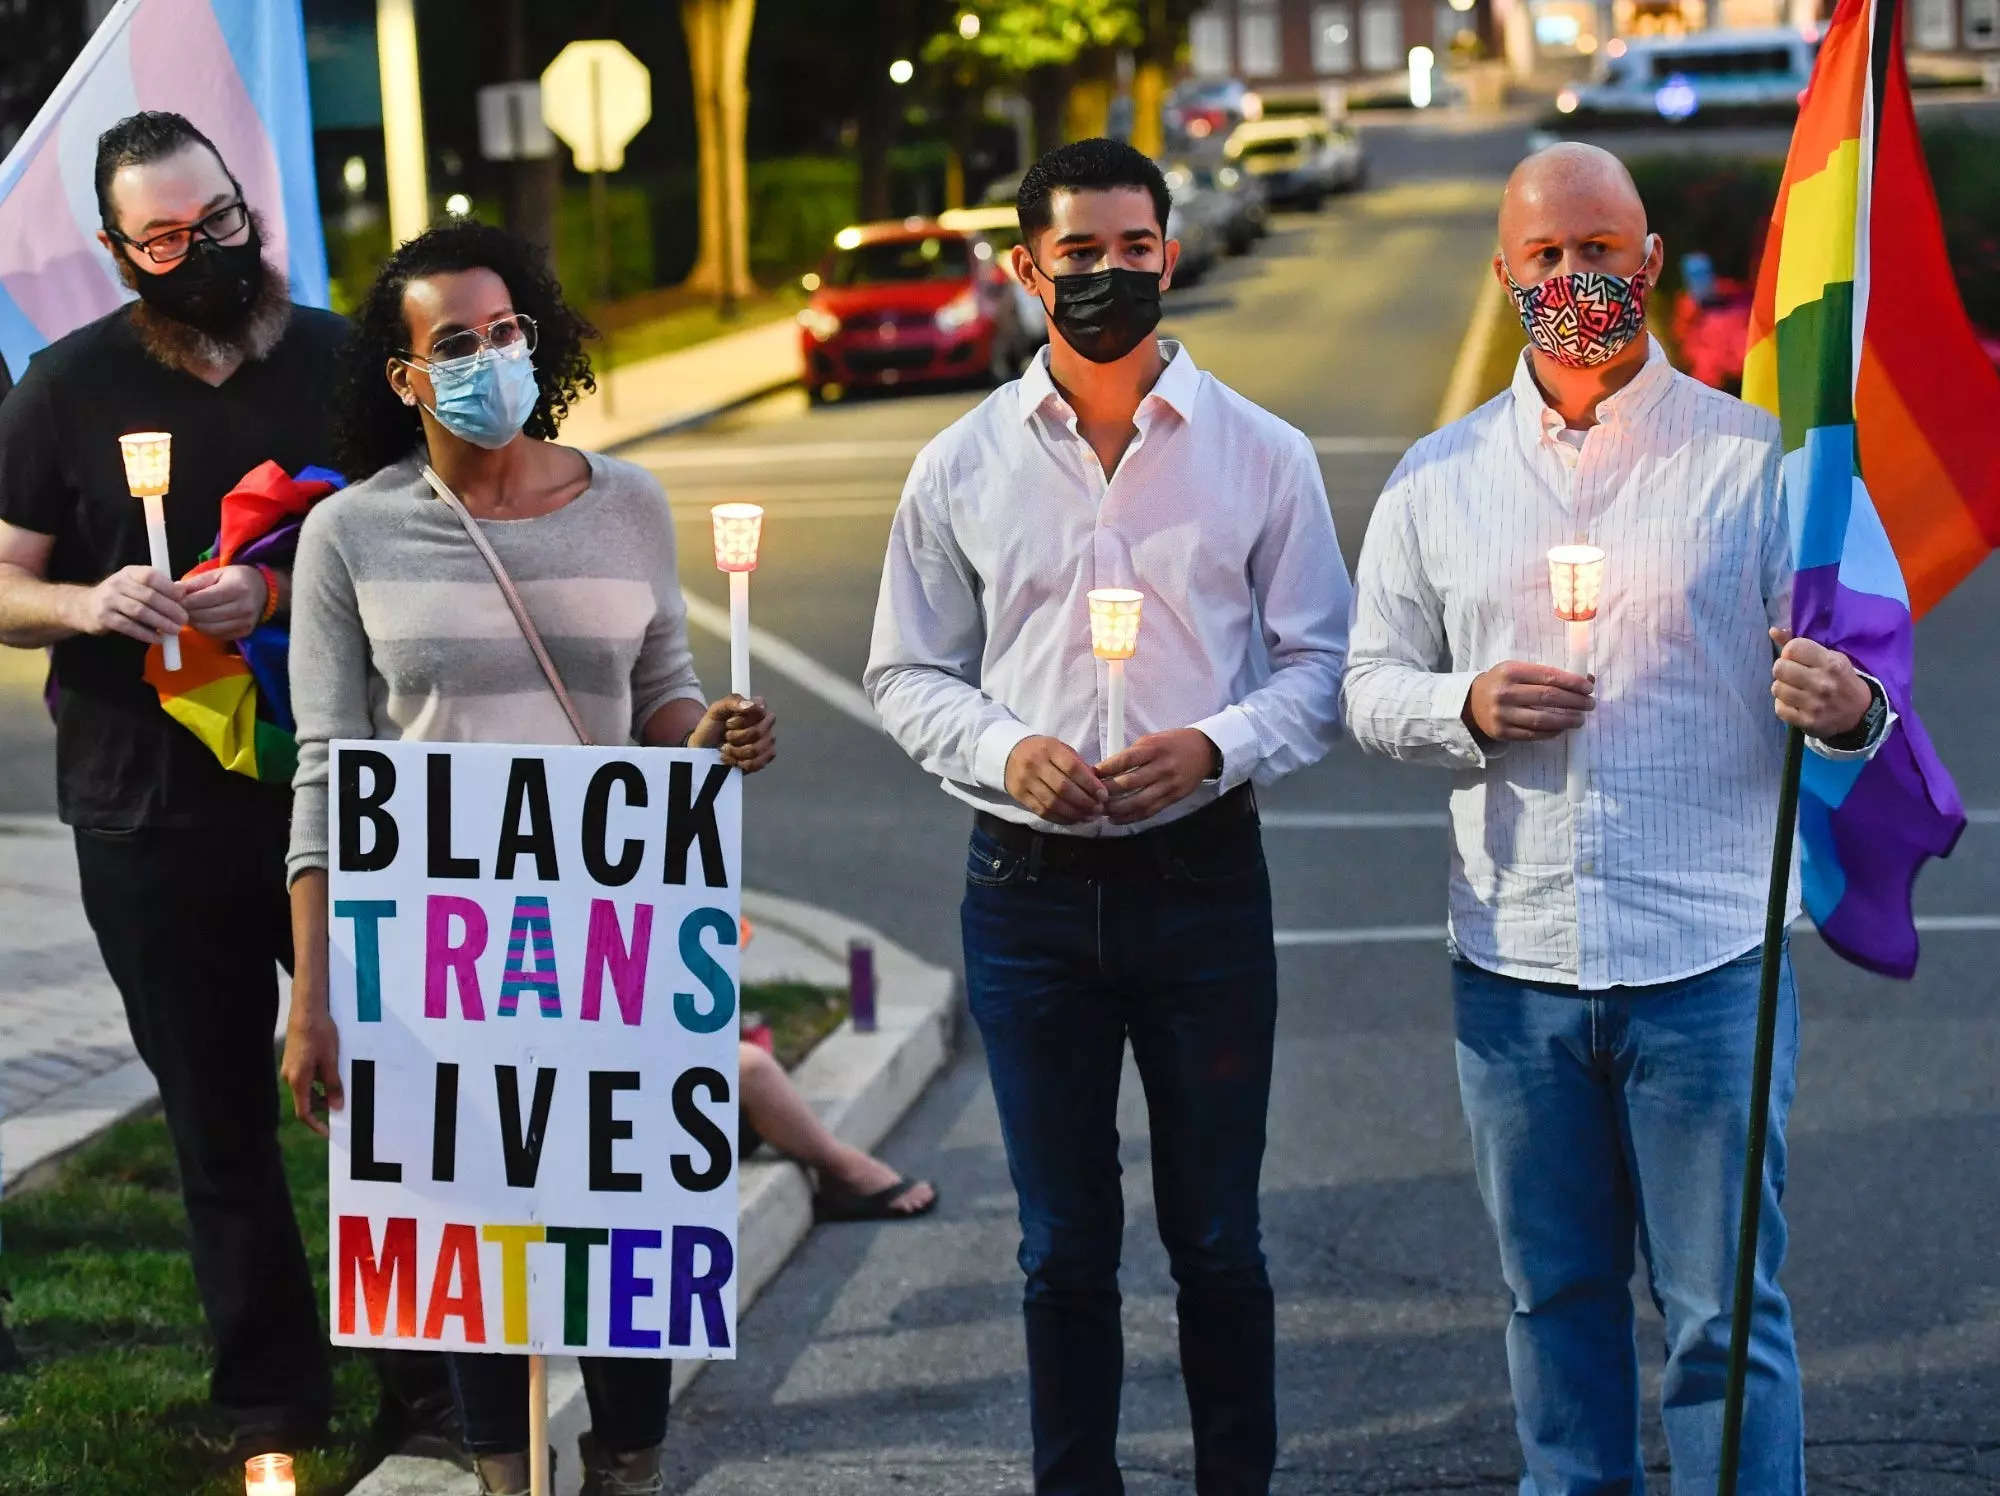 A candlelight vigil on September 14, 2020 at the Reading Hospital in West Reading, PA in support of Roxanne, a black trans woman shot by Reading Police